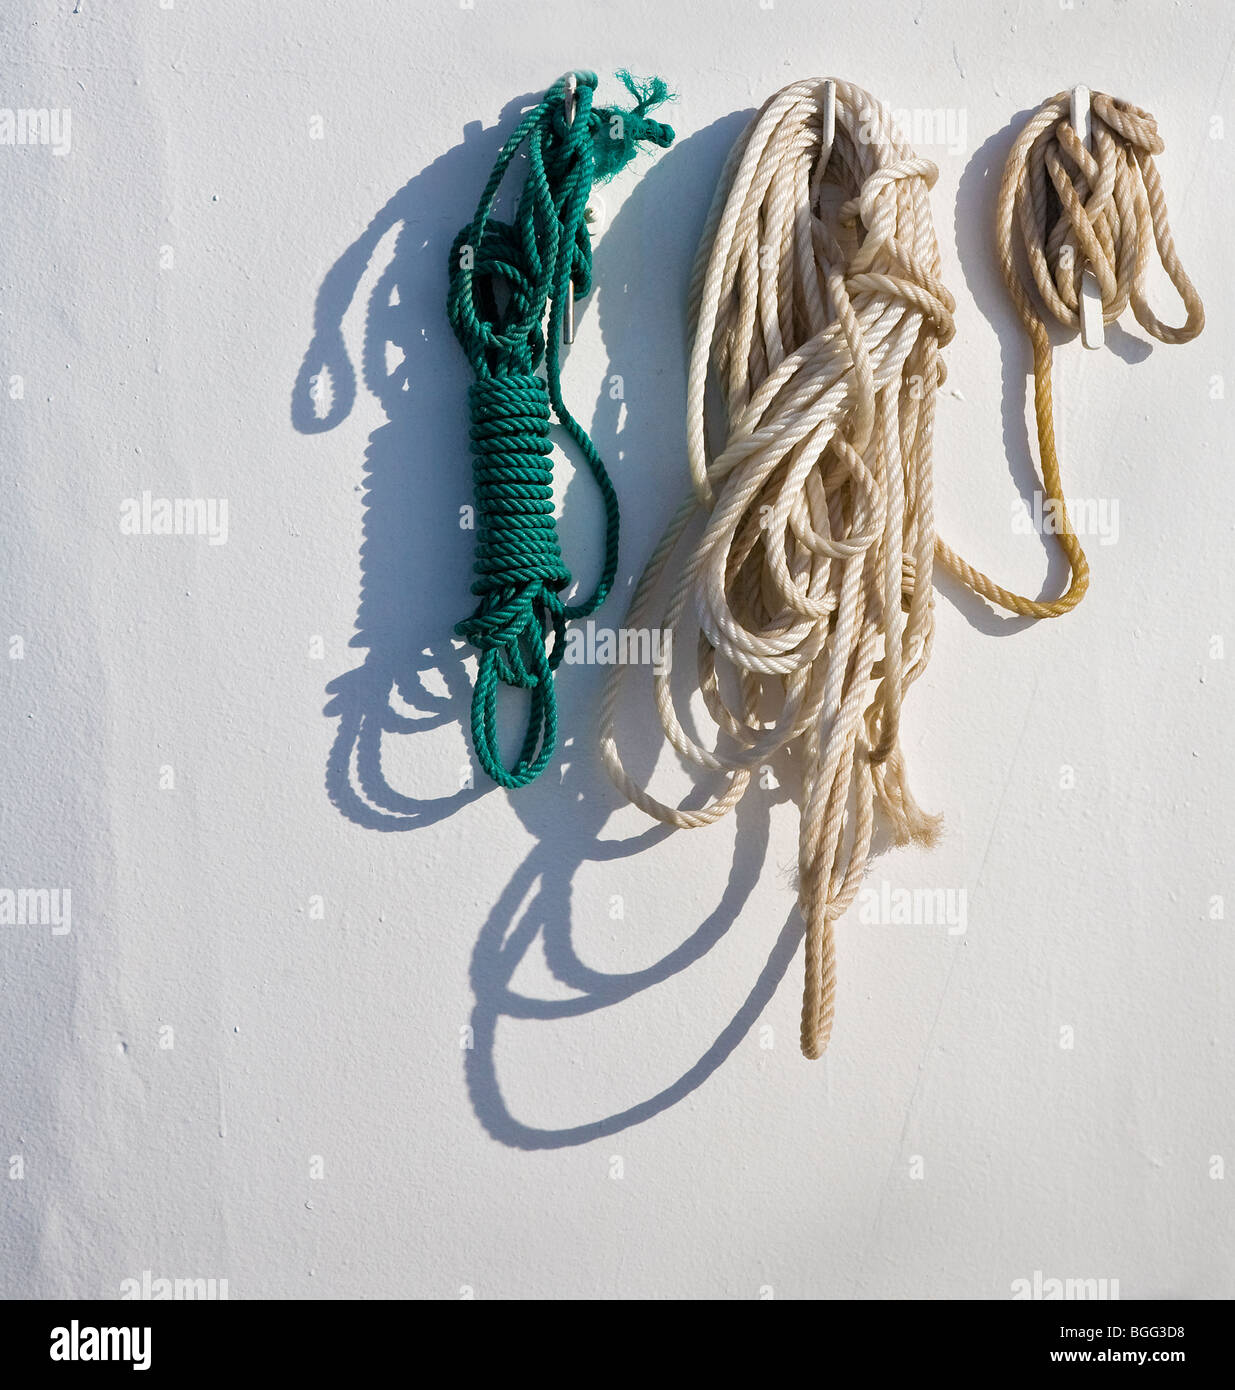 https://c8.alamy.com/comp/BGG3D8/rope-and-shadow-hanging-from-hooks-on-a-ships-funnel-BGG3D8.jpg